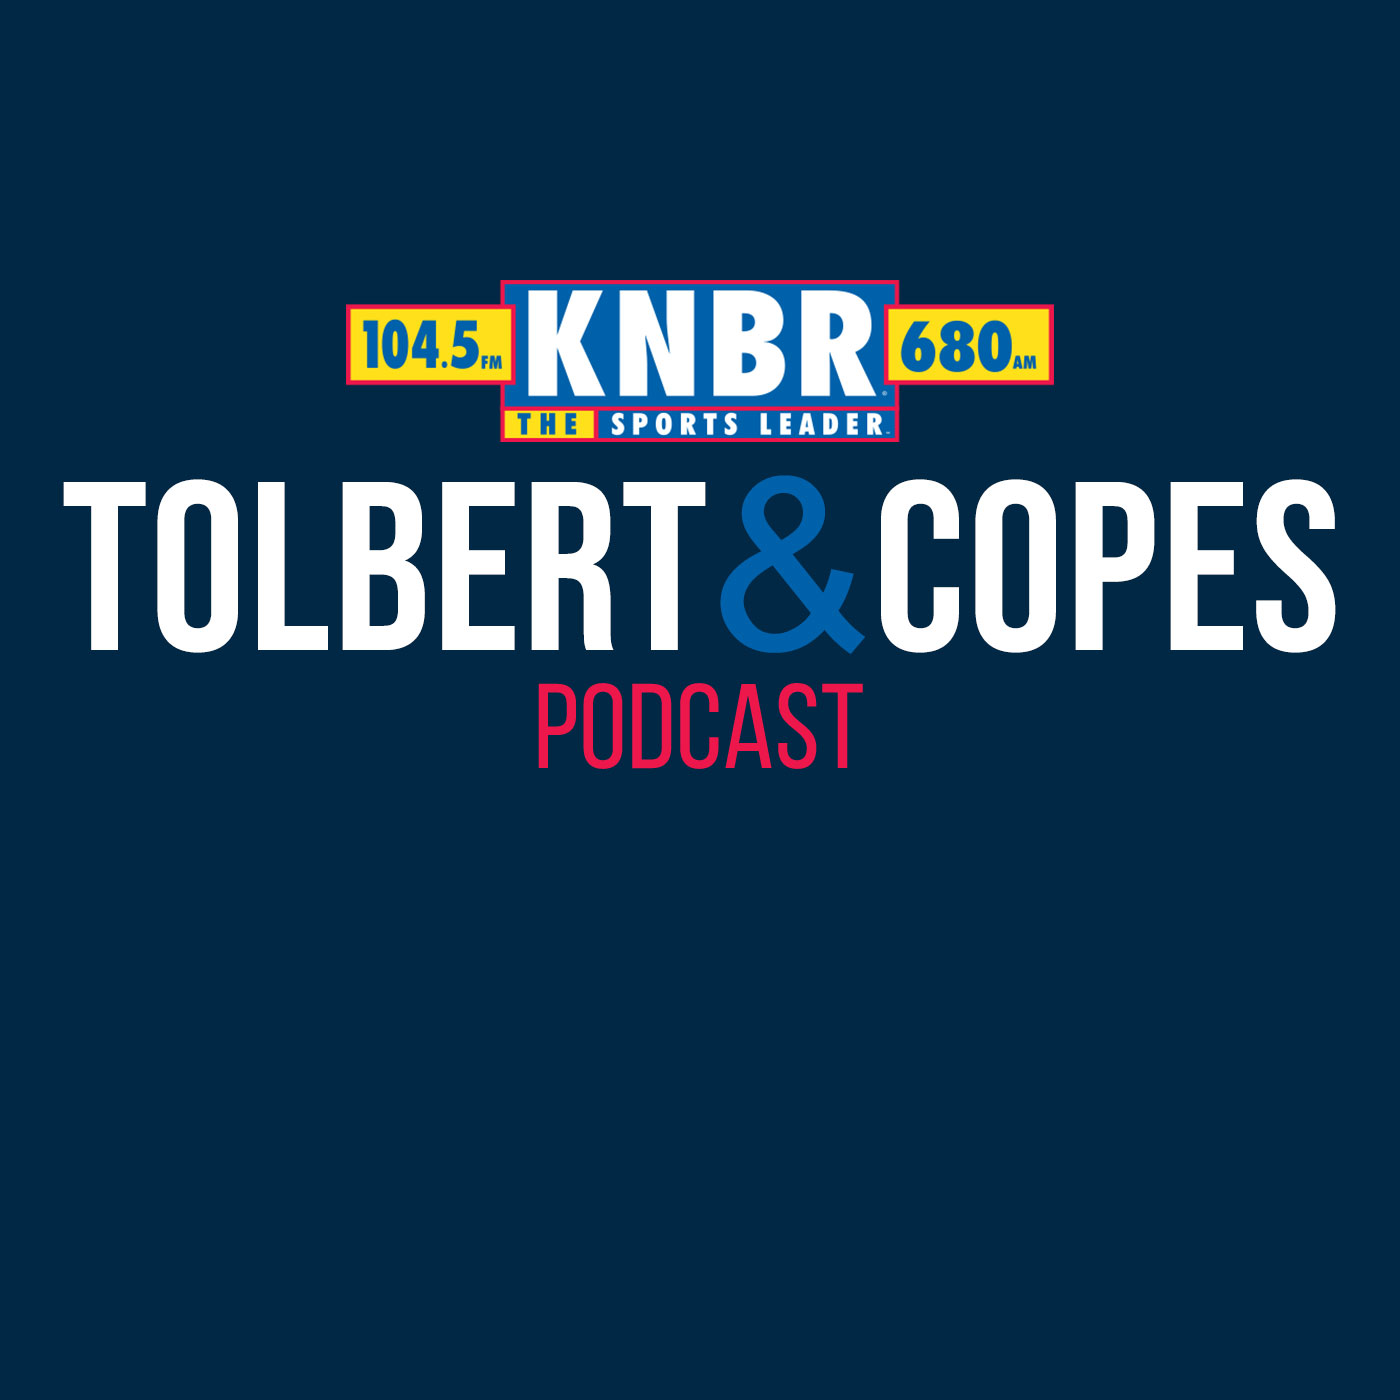 6-25 Tolbert & Copes Hour 1: Would Paul George Really Make the Warriors Contenders?